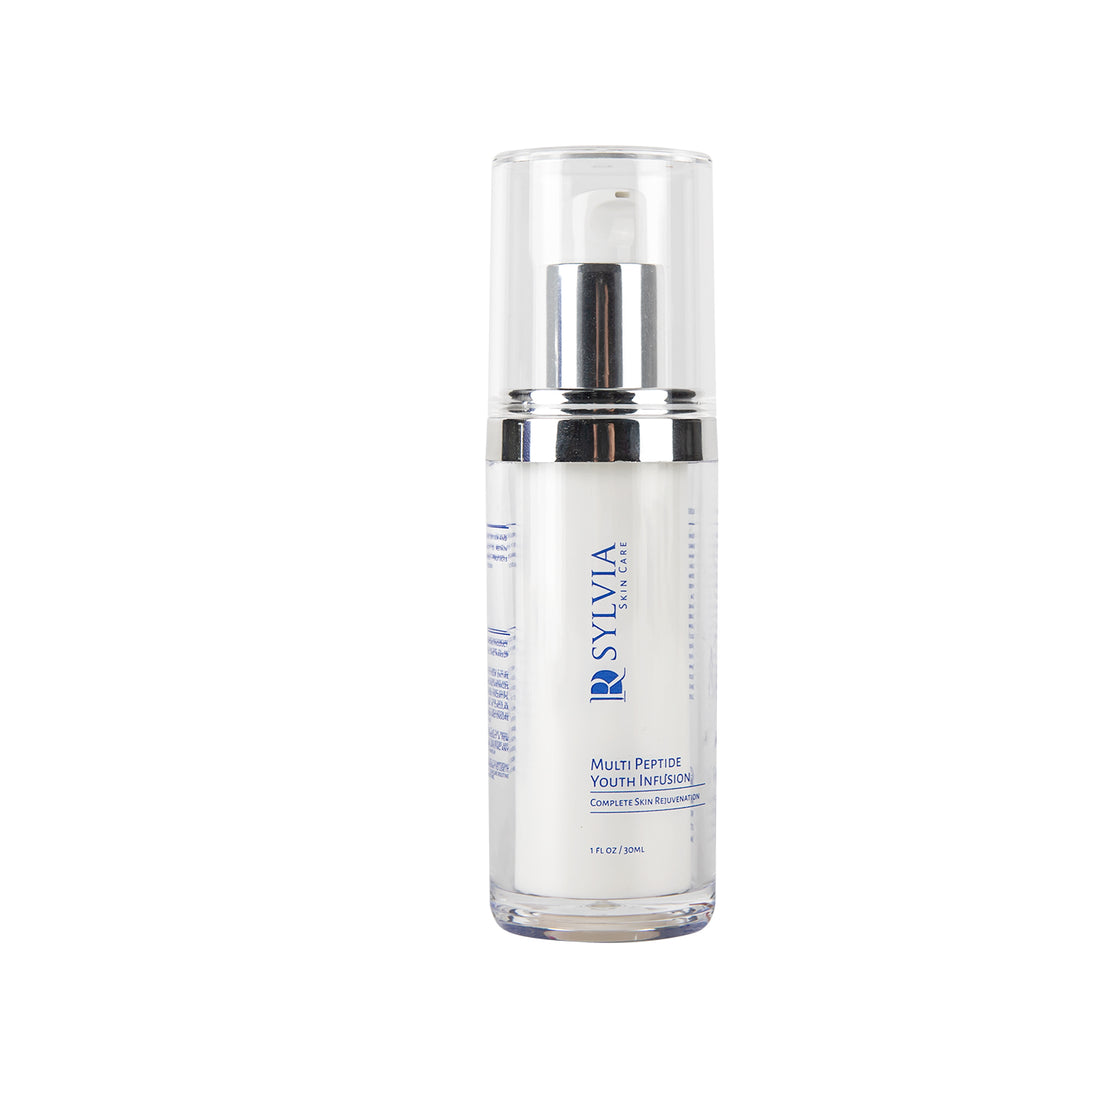 MULTI PEPTIDE YOUTH INFUSION